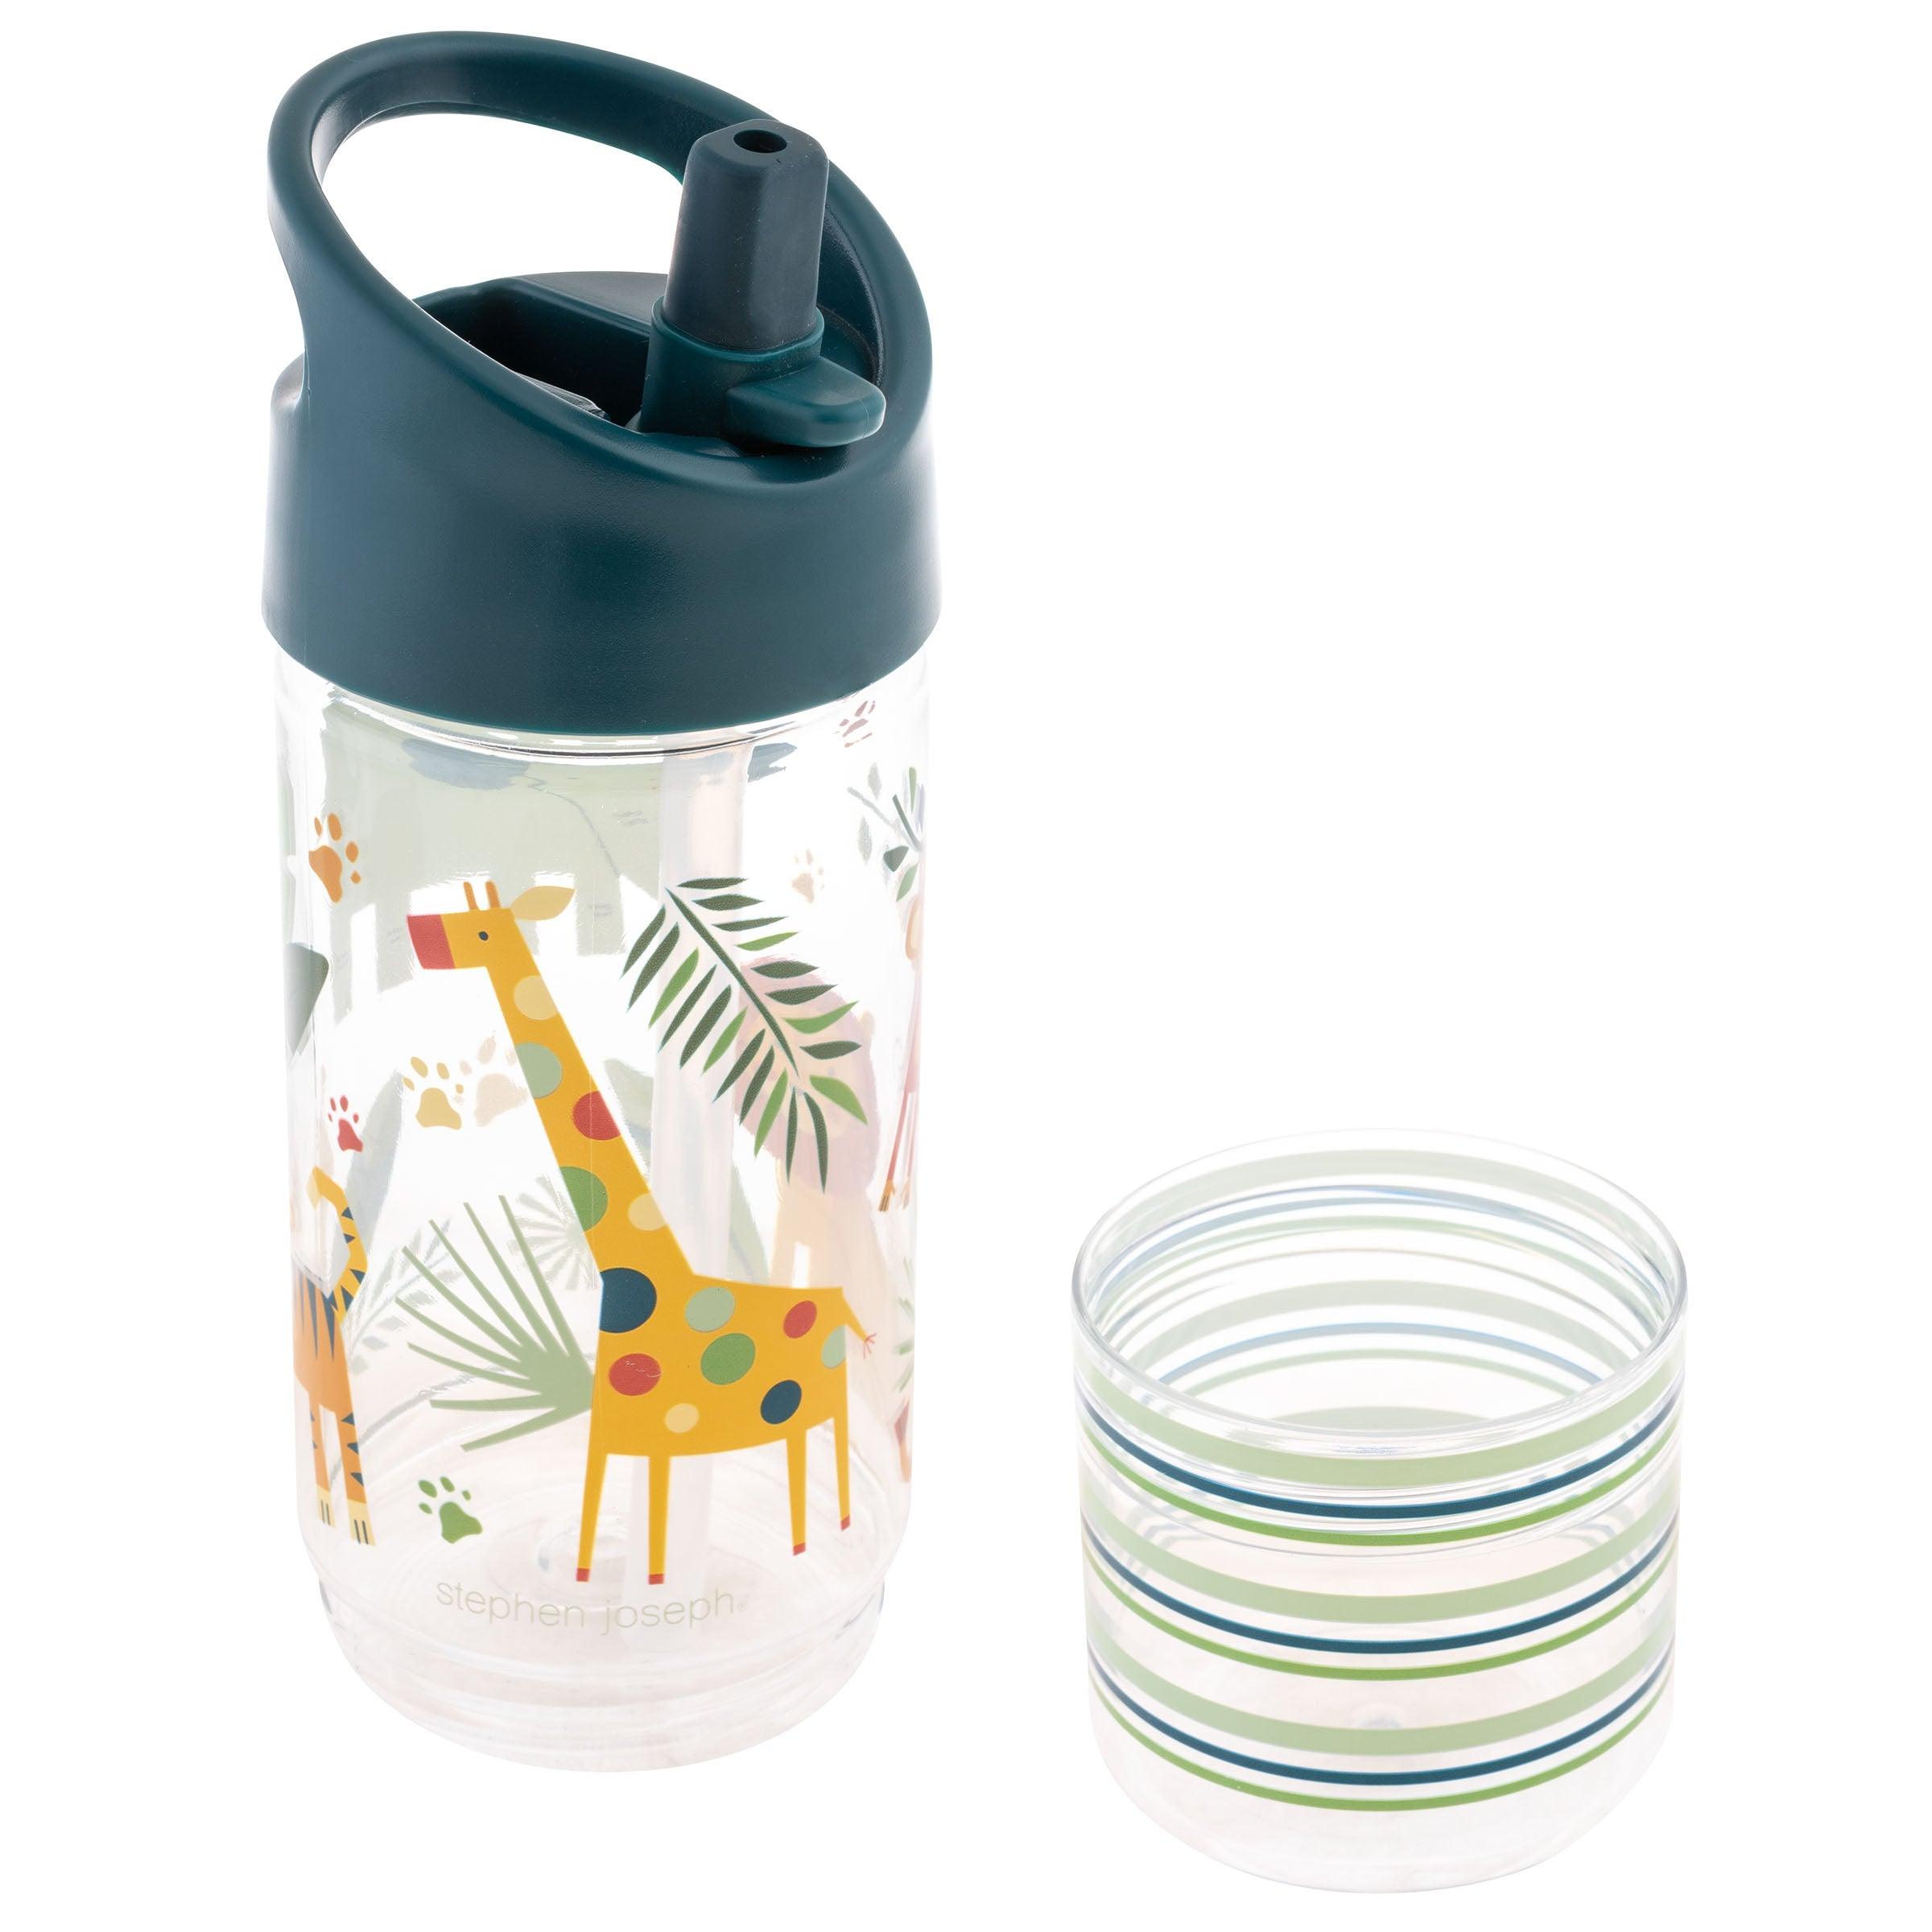 Stephen Joseph Sip And Snack Zoo Water Bottle - BumbleToys - 5-7 Years, Cecil, Girls, Pre-Order, School Supplies, Water Bottle